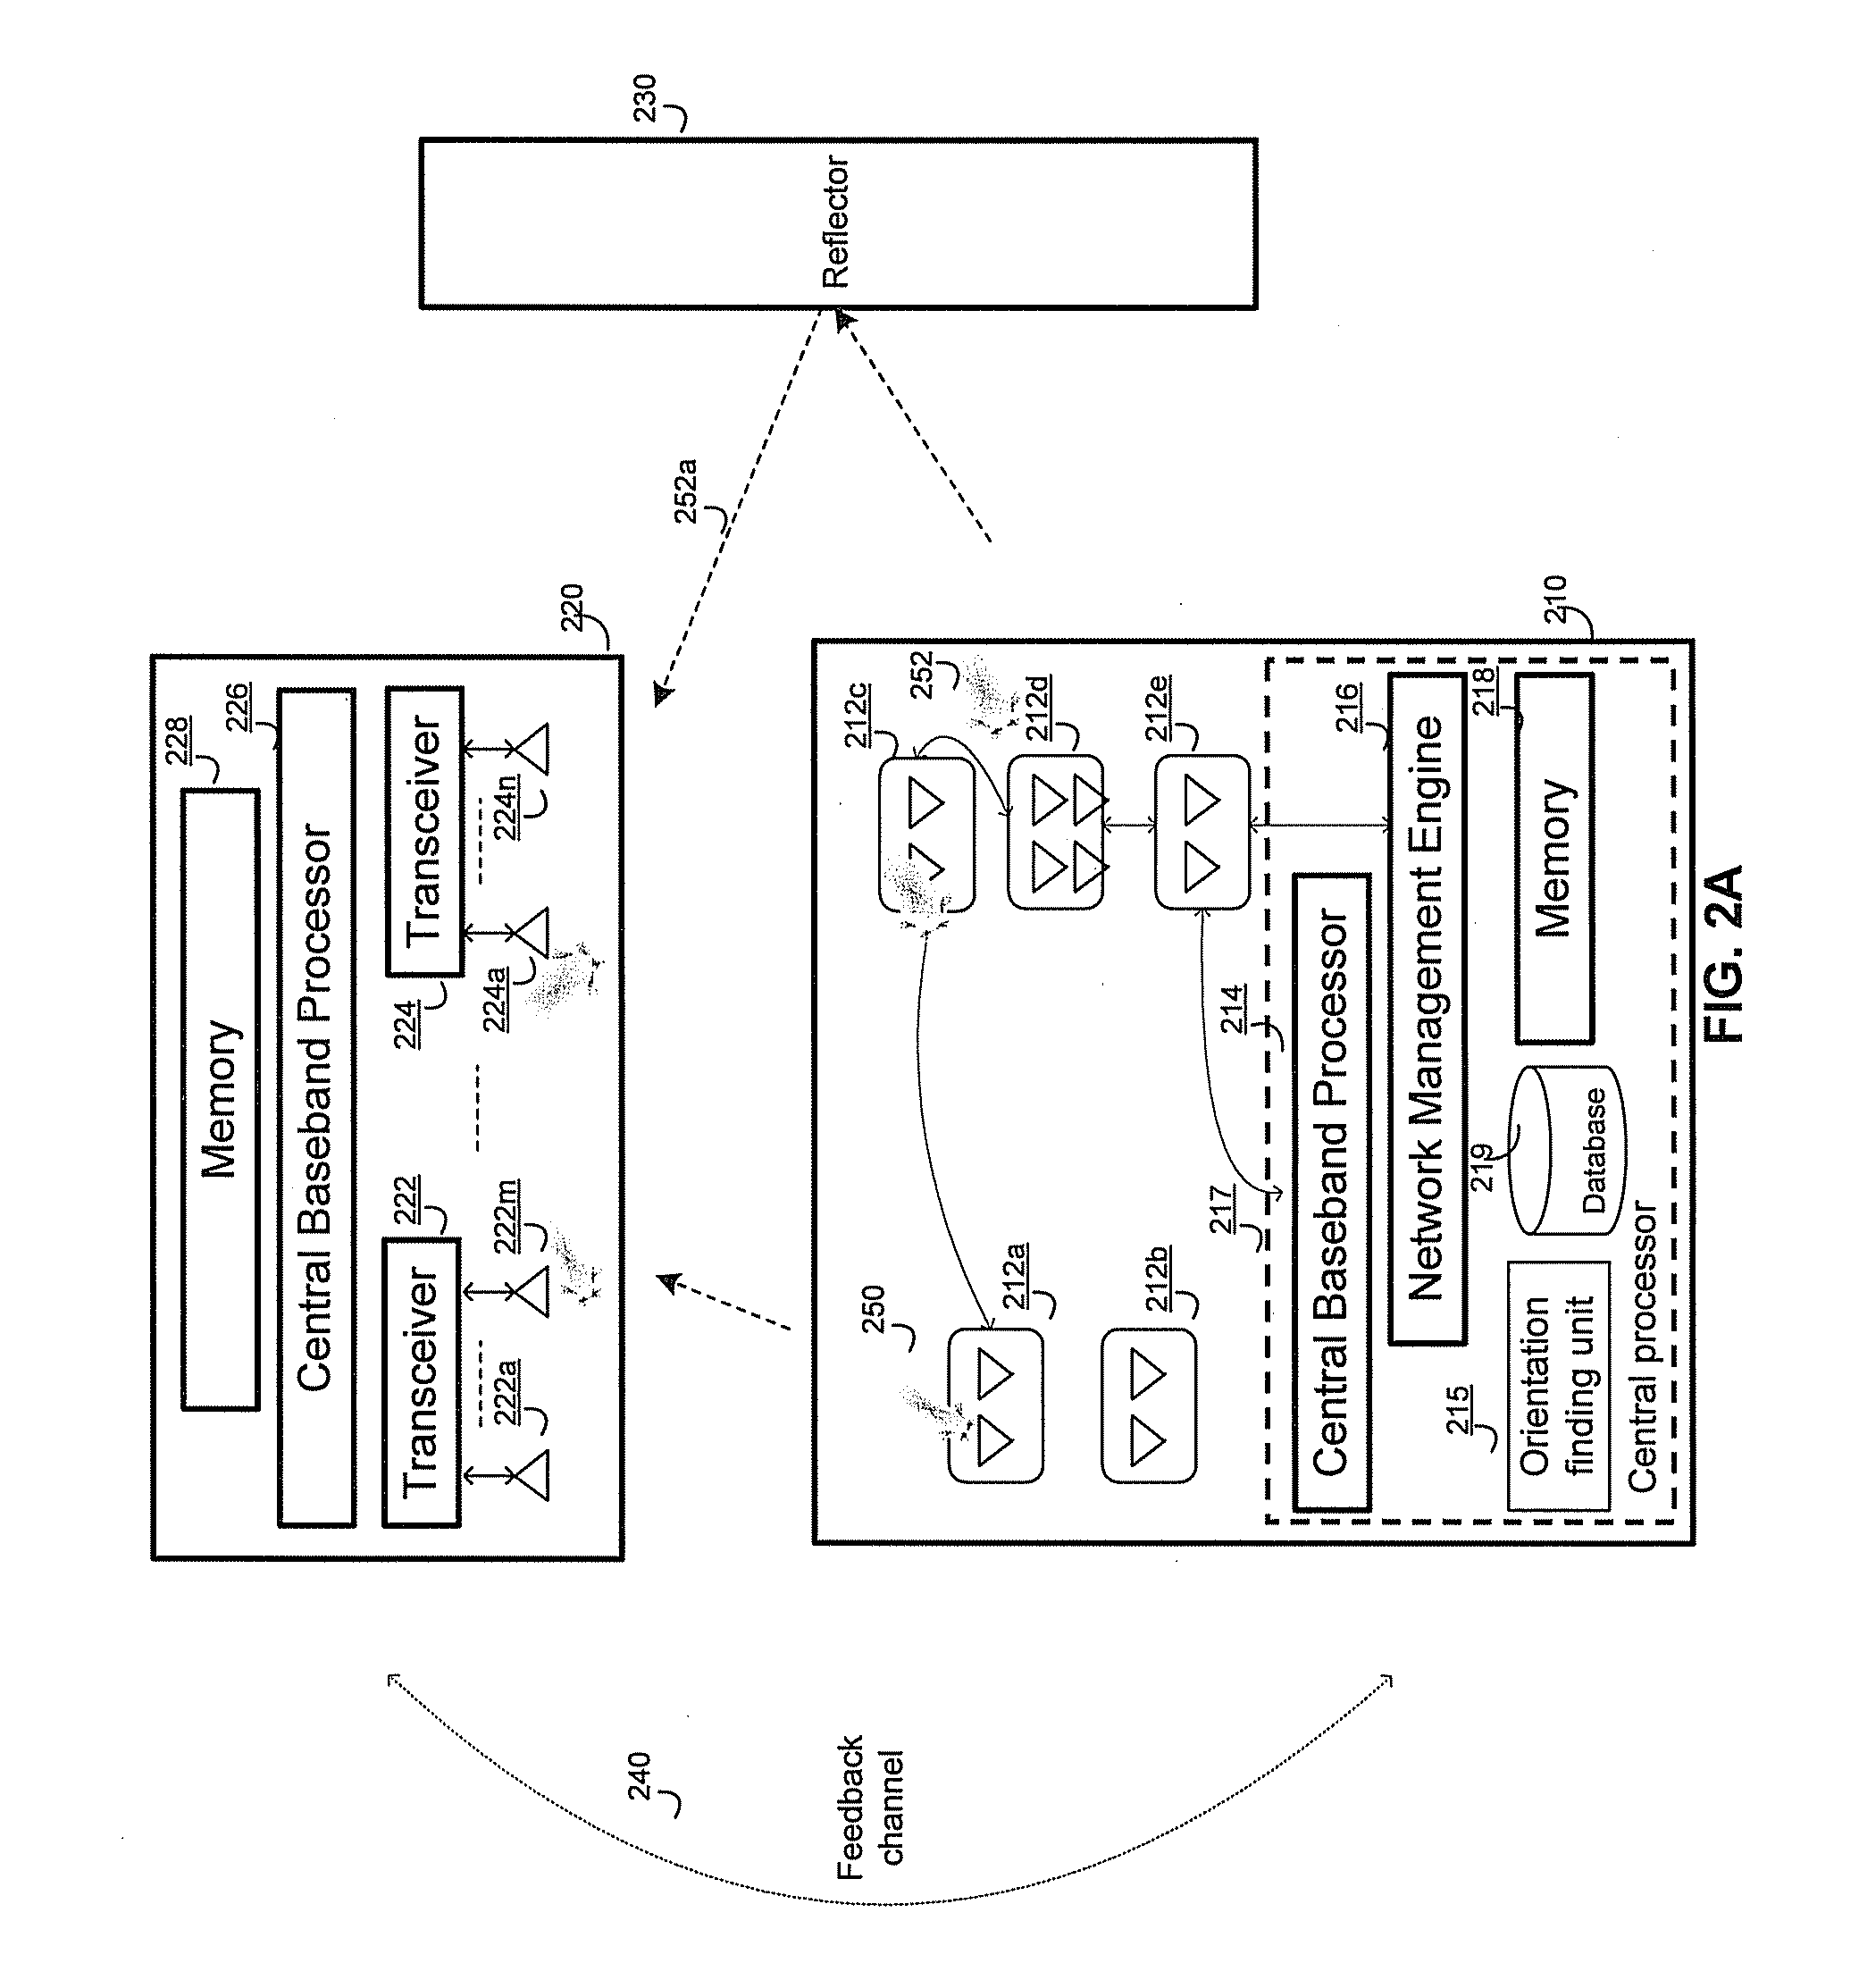 Method and system for centralized or distributed resource management in a distributed transceiver network